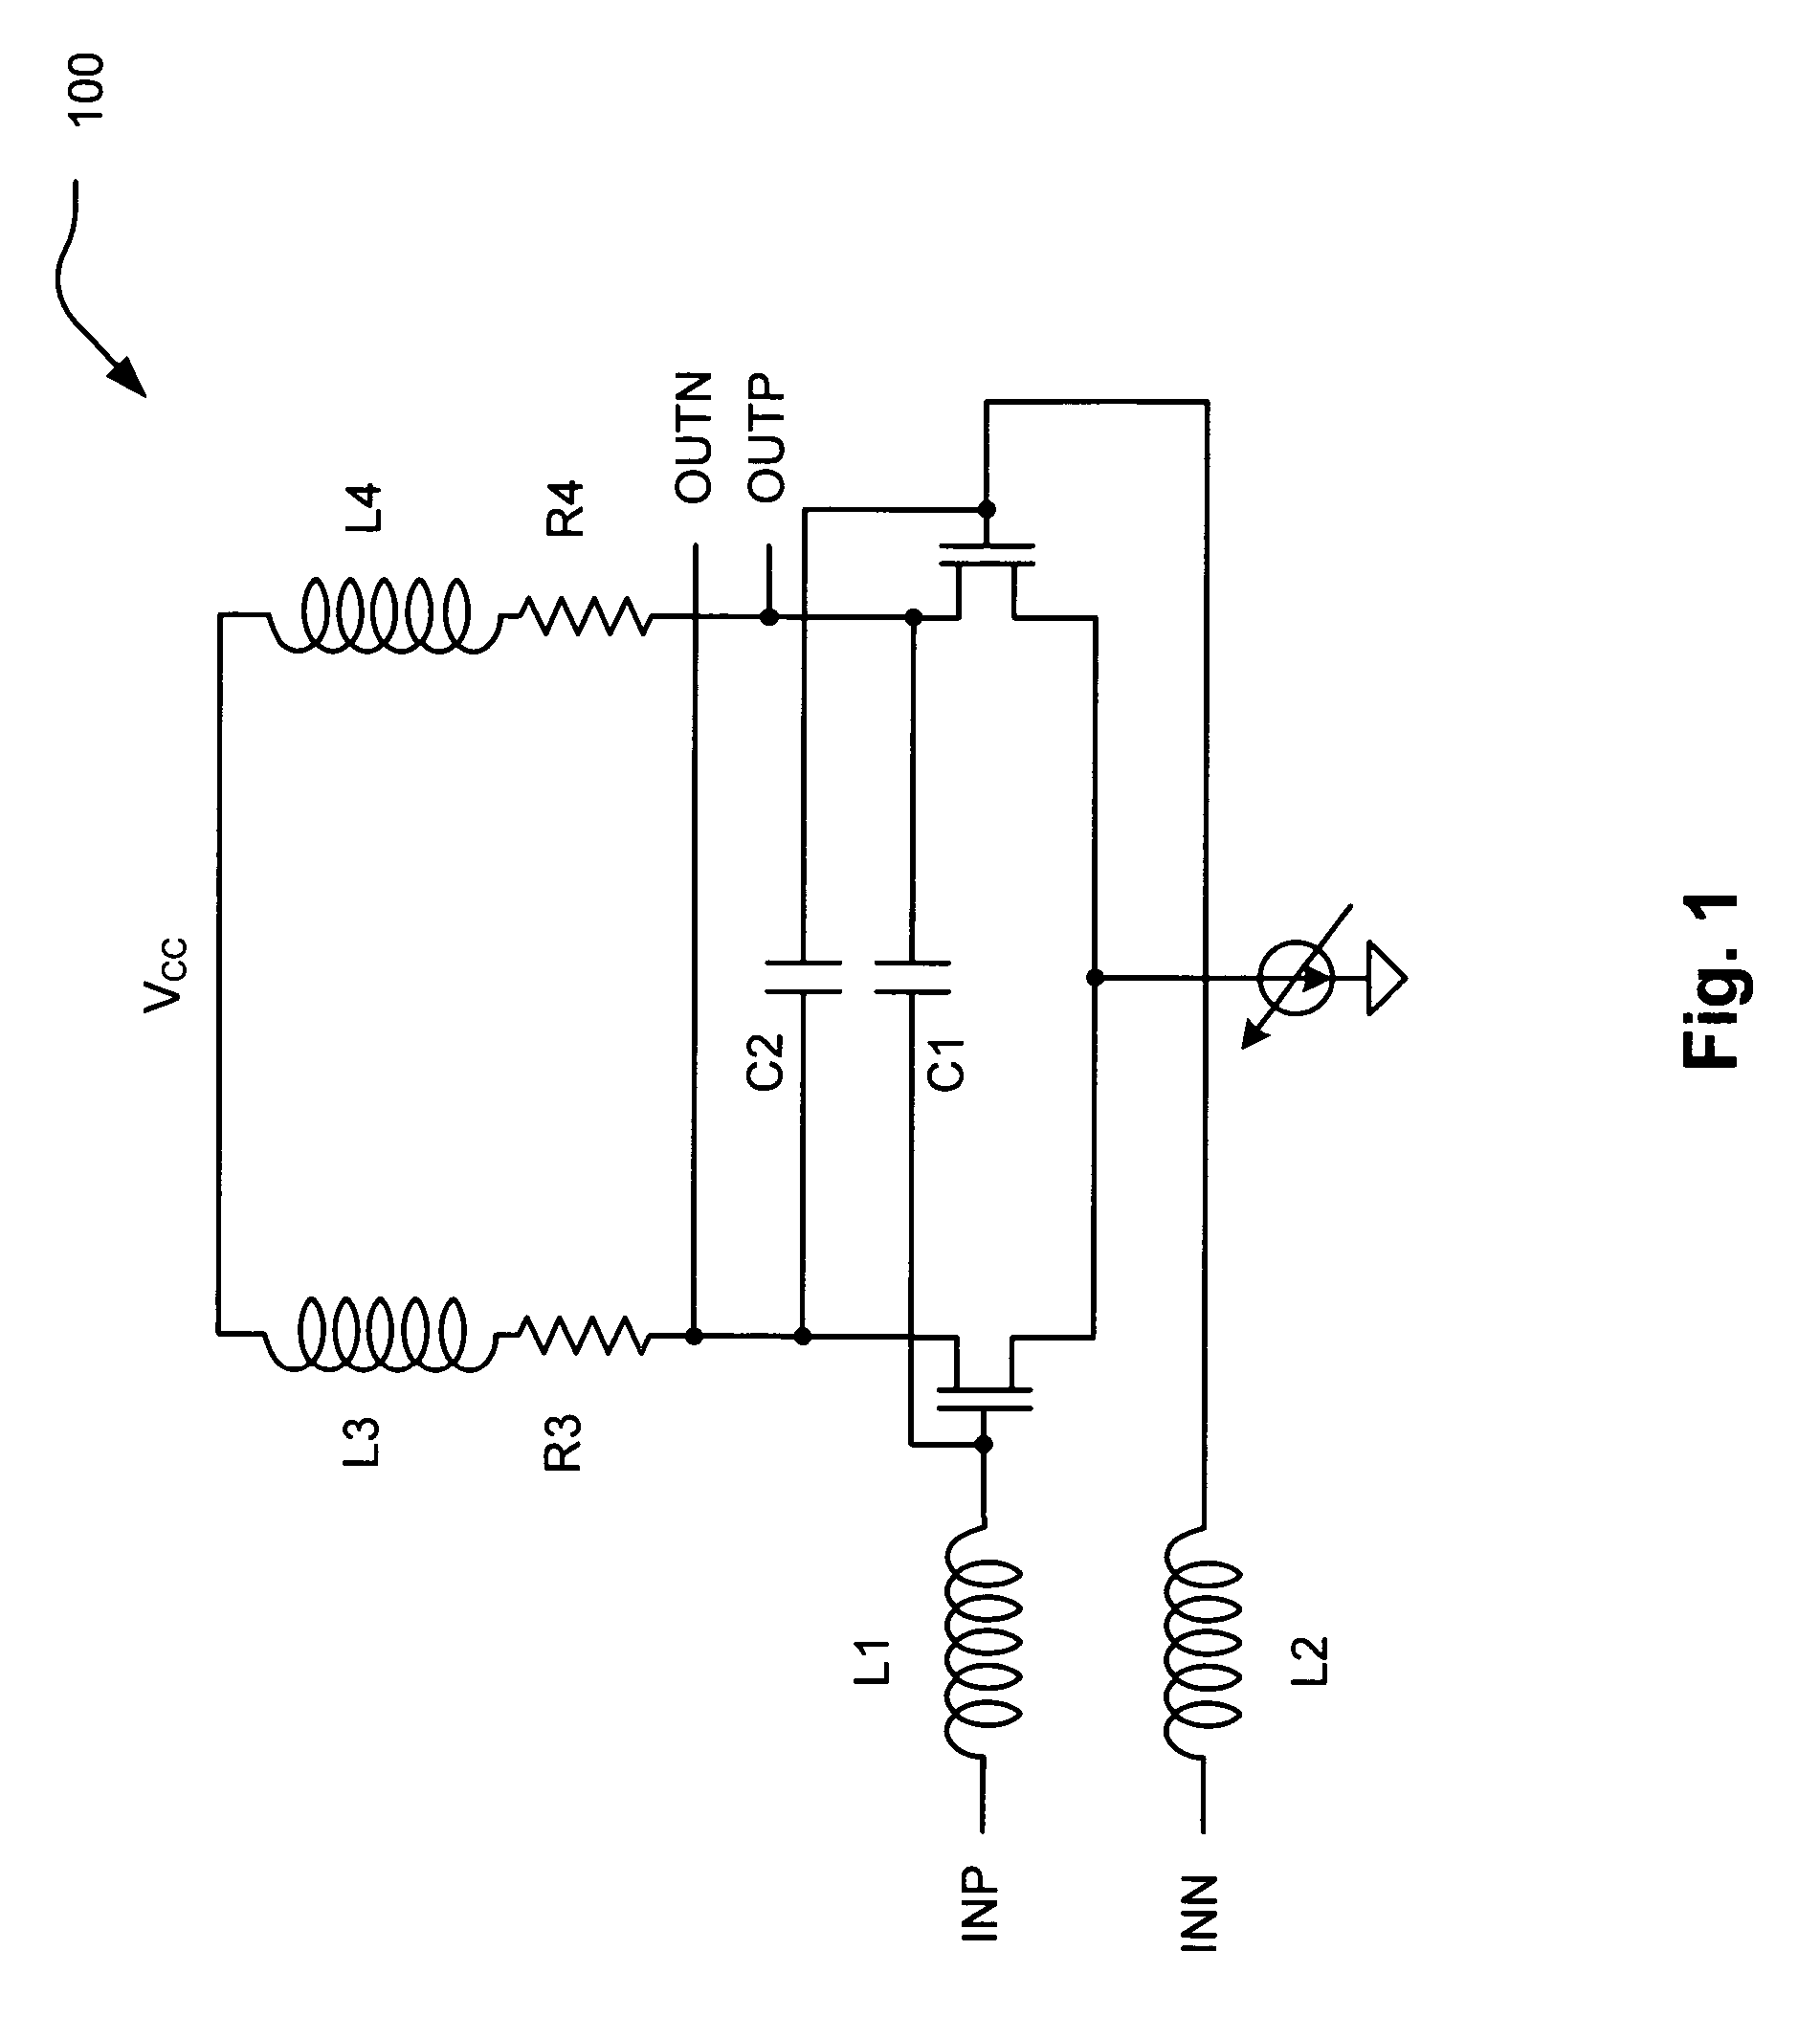 Current-controlled CMOS (C3MOS) fully differential integrated delay cell with variable delay and high bandwidth